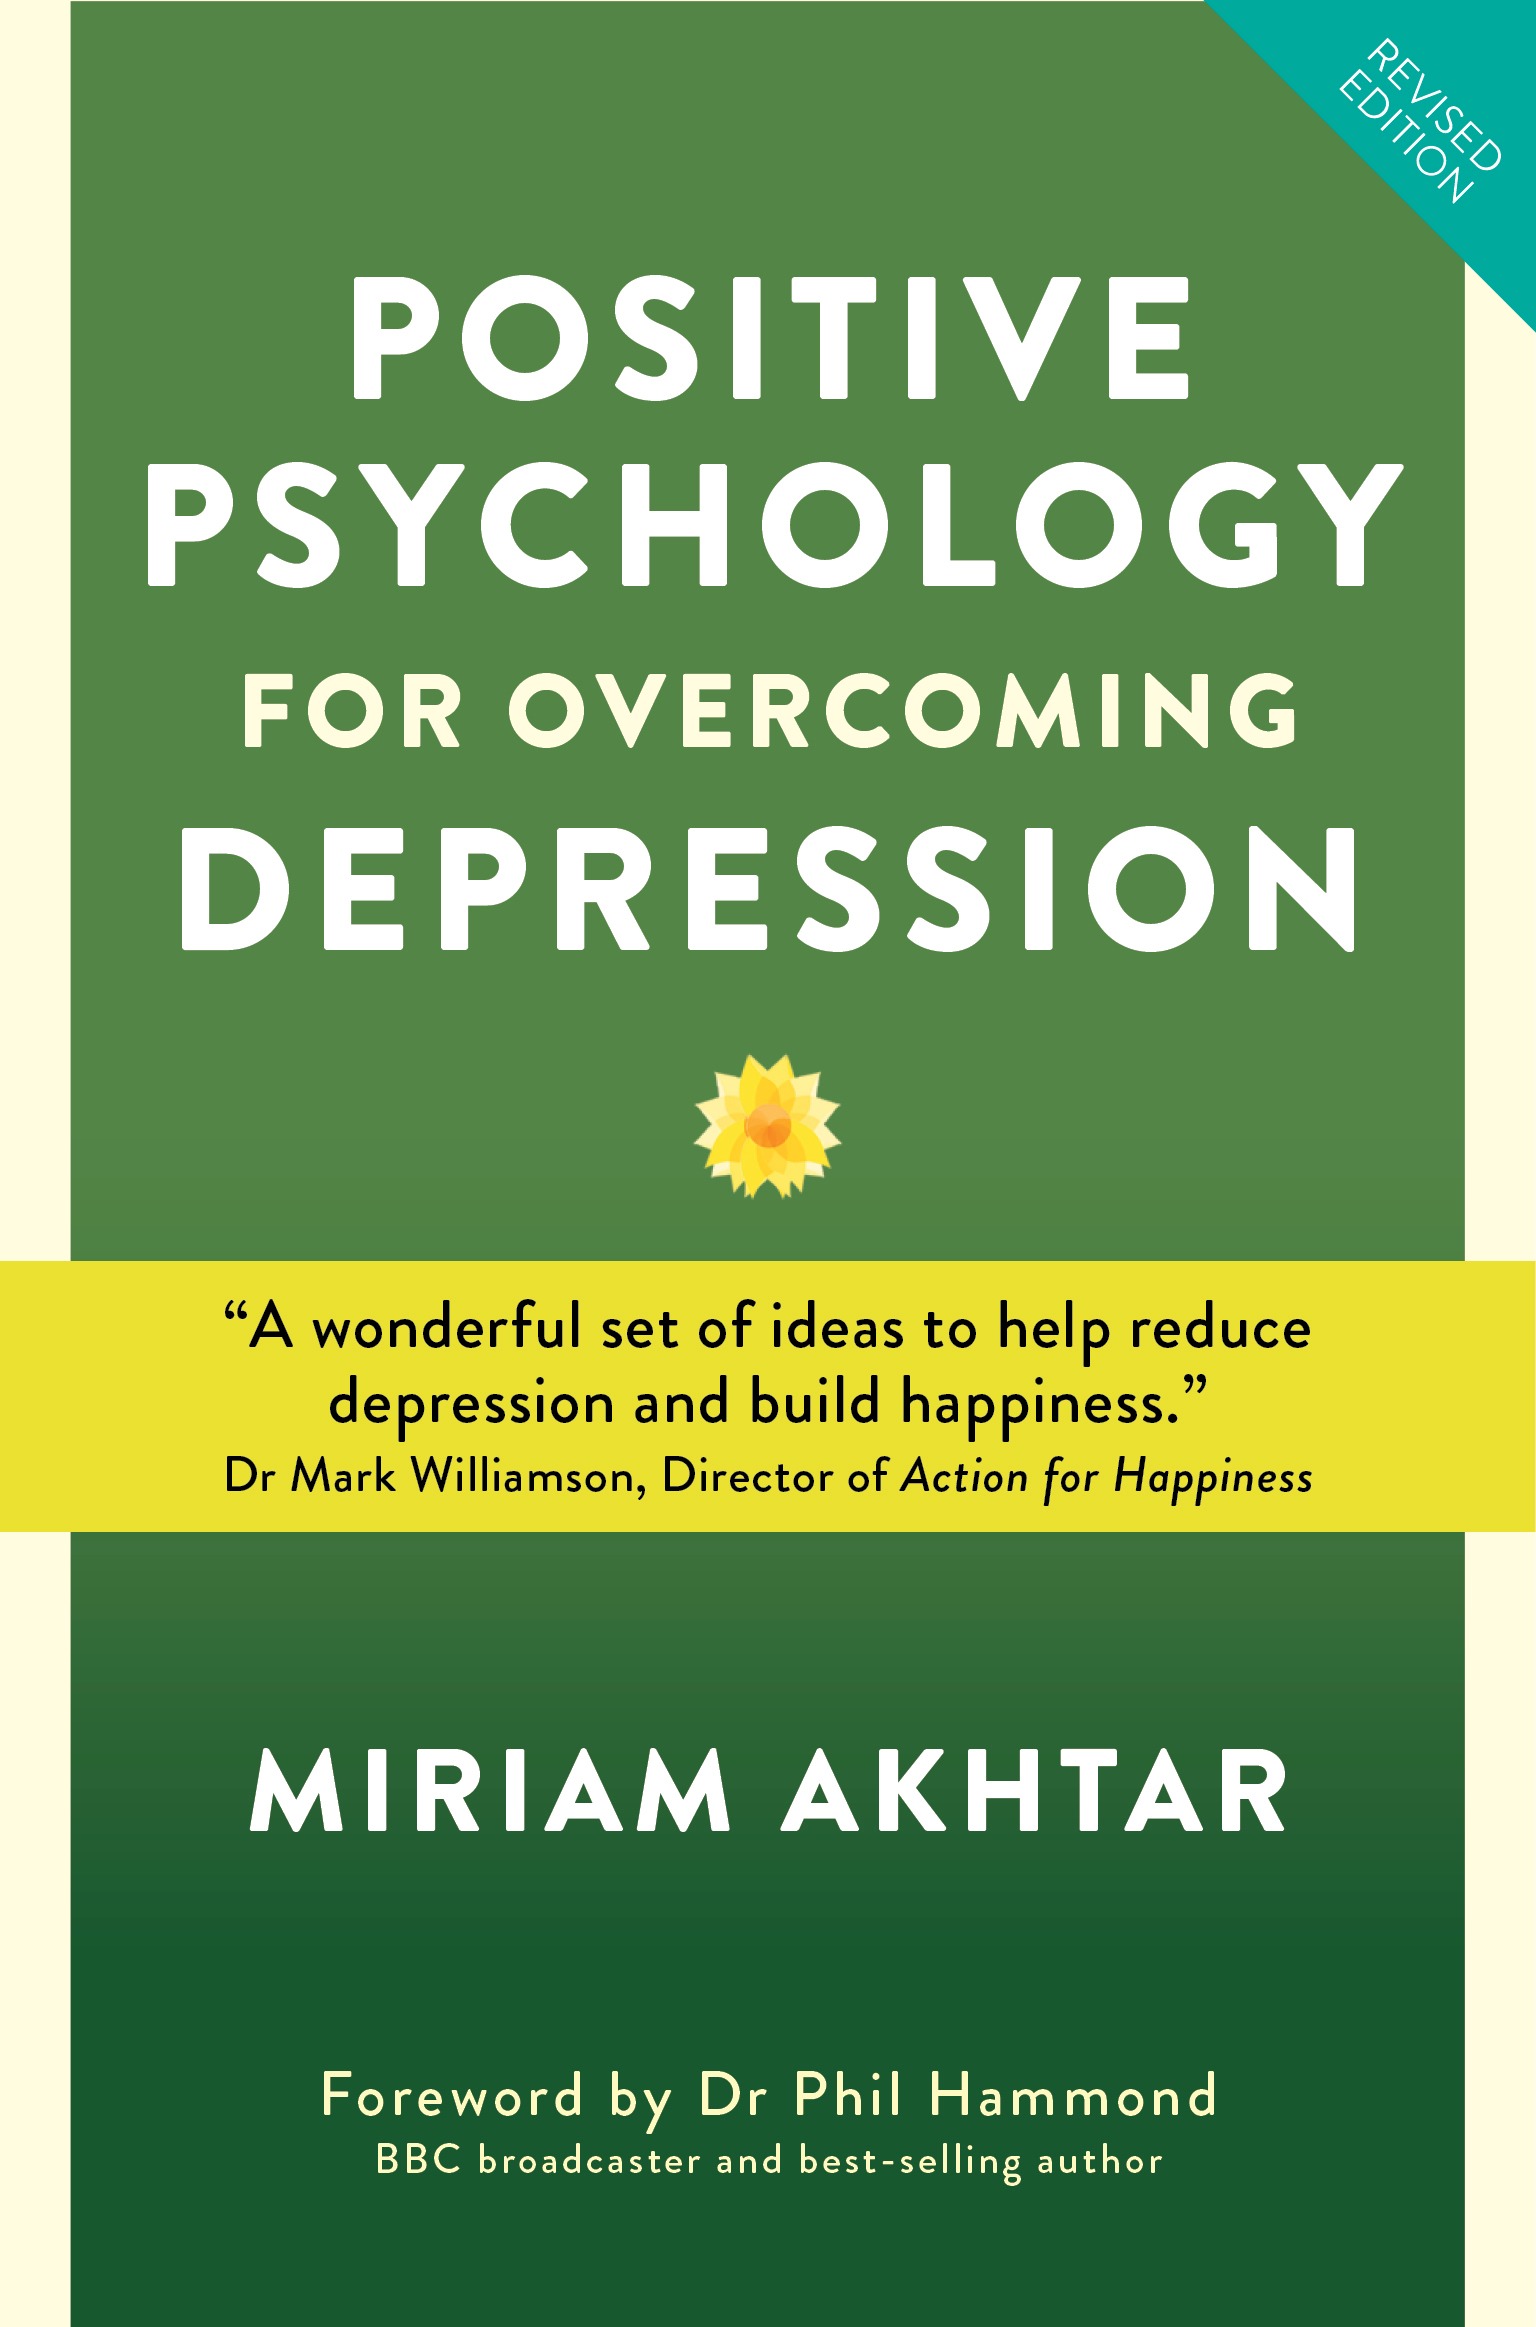 Positive Psychology For Overcoming Depression : Self-help Strategies to Build Strength, Resilience and Sustainable Happiness | Akhtar, Miriam